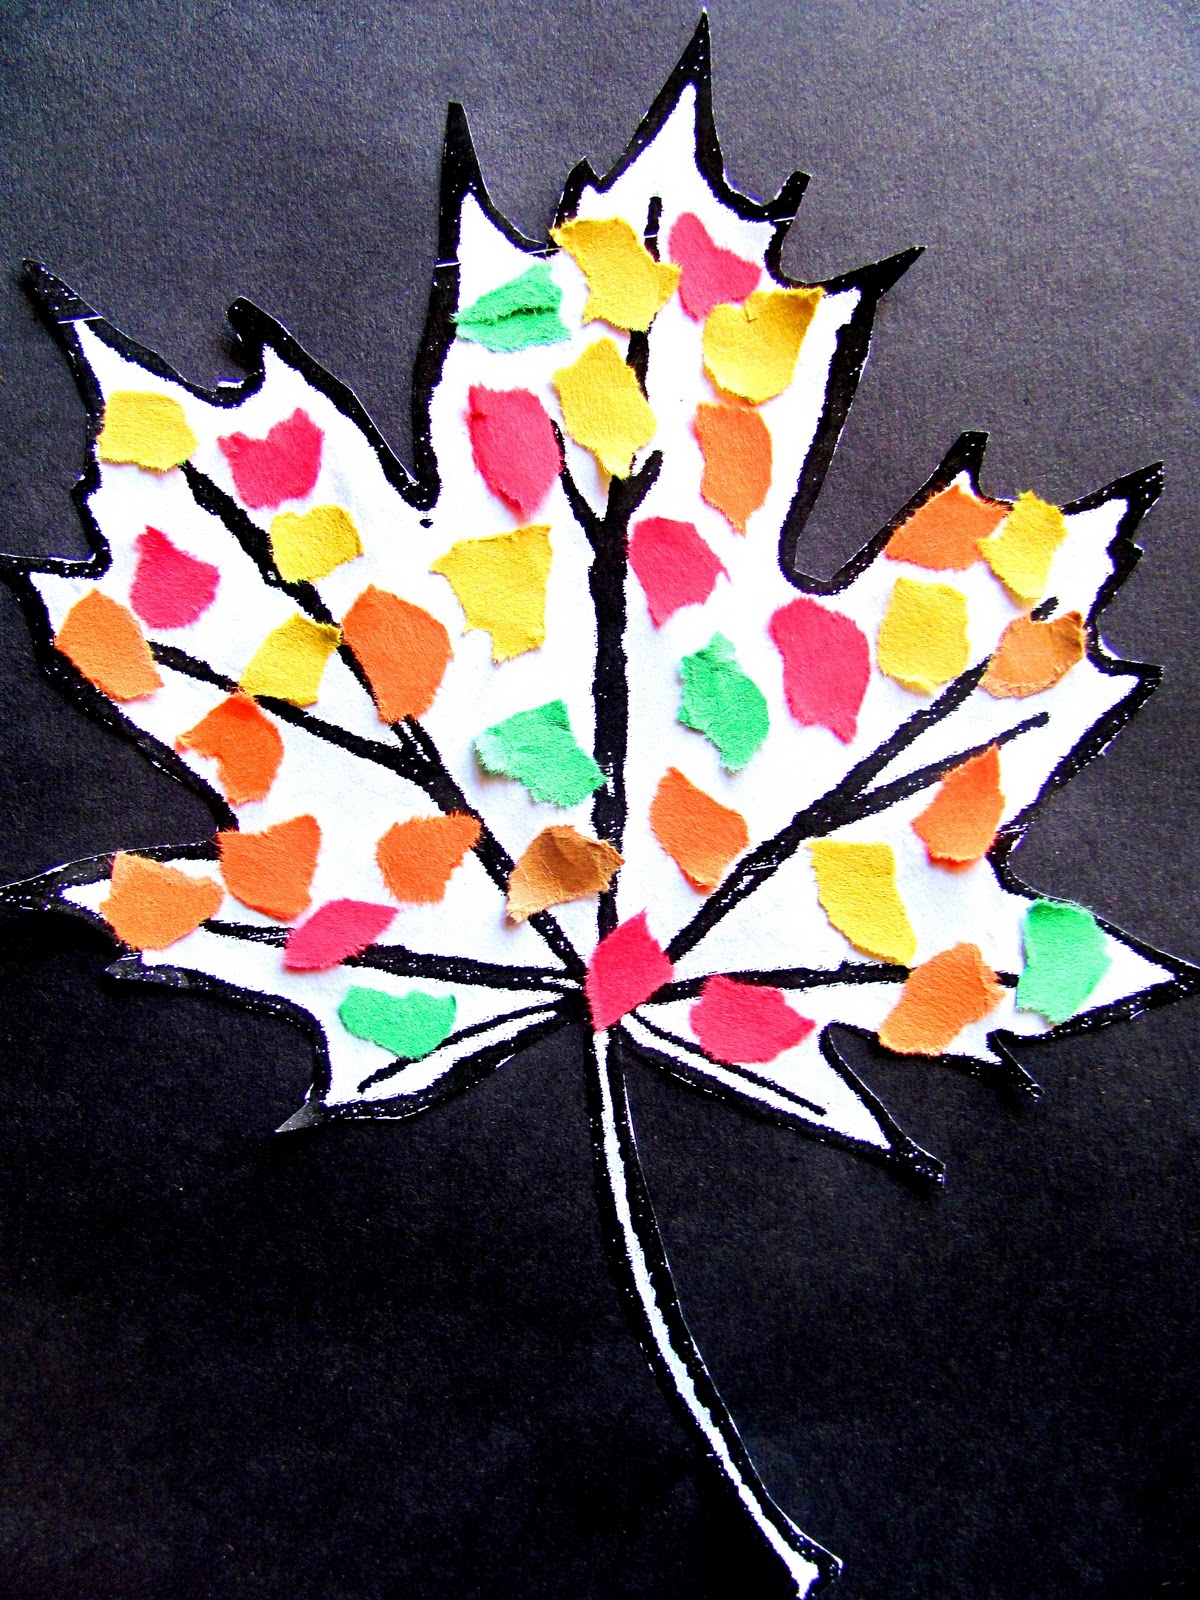 colormehappy: Colorful fall leaves - A fun art project using